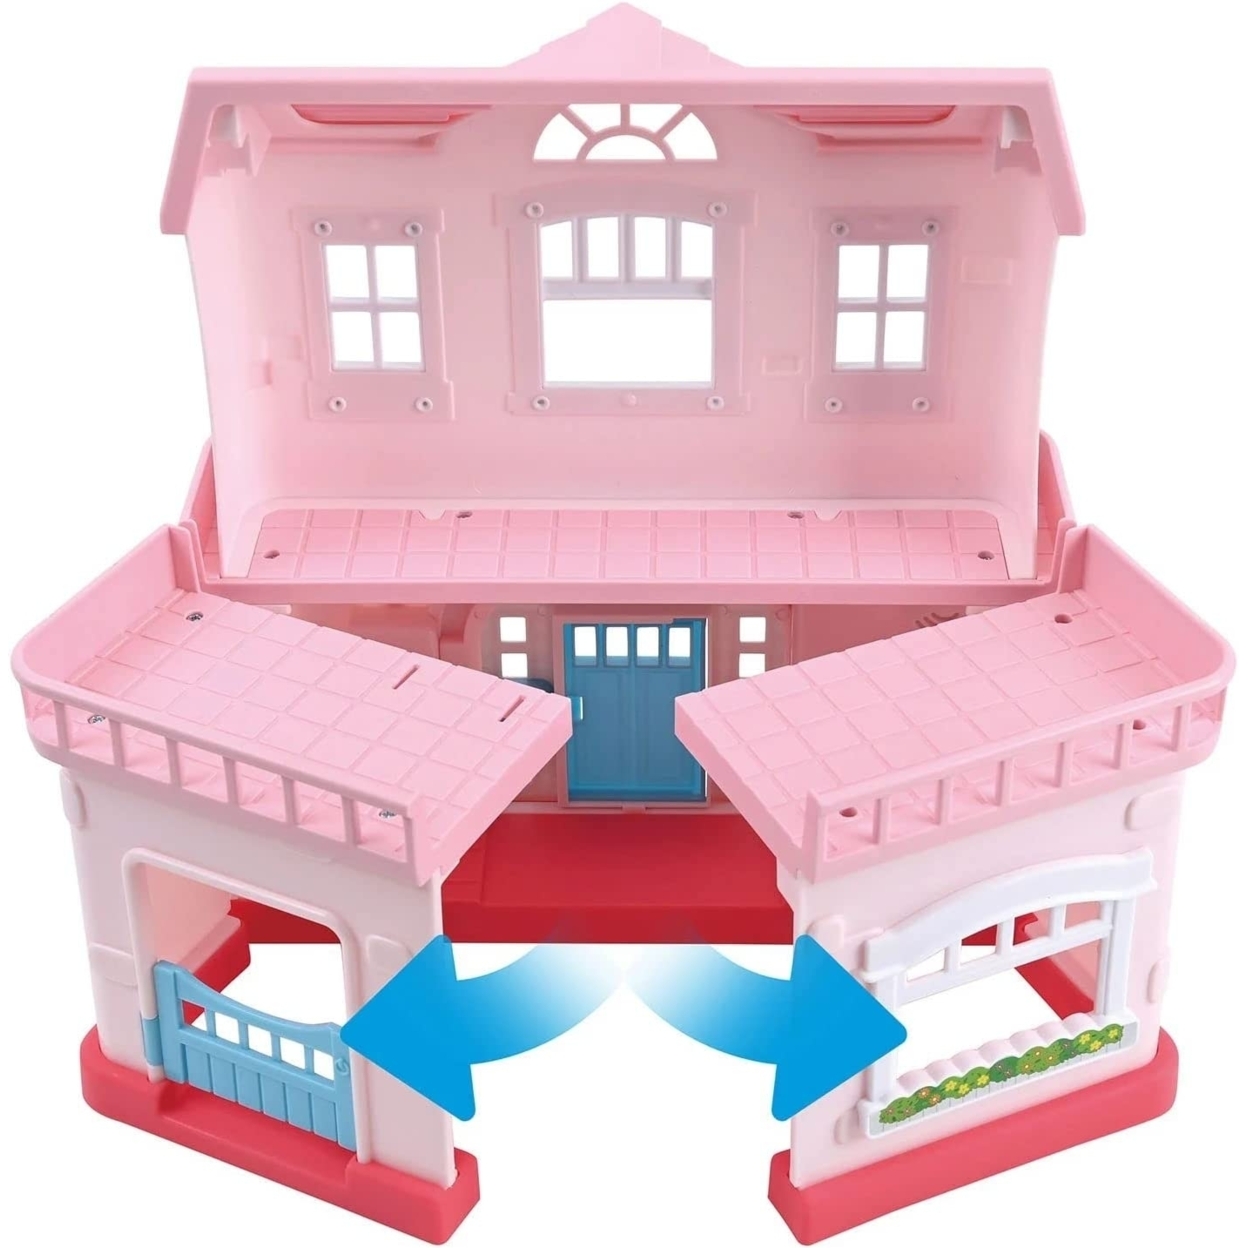 Member's Mark Preschool Playset, Country Cottage